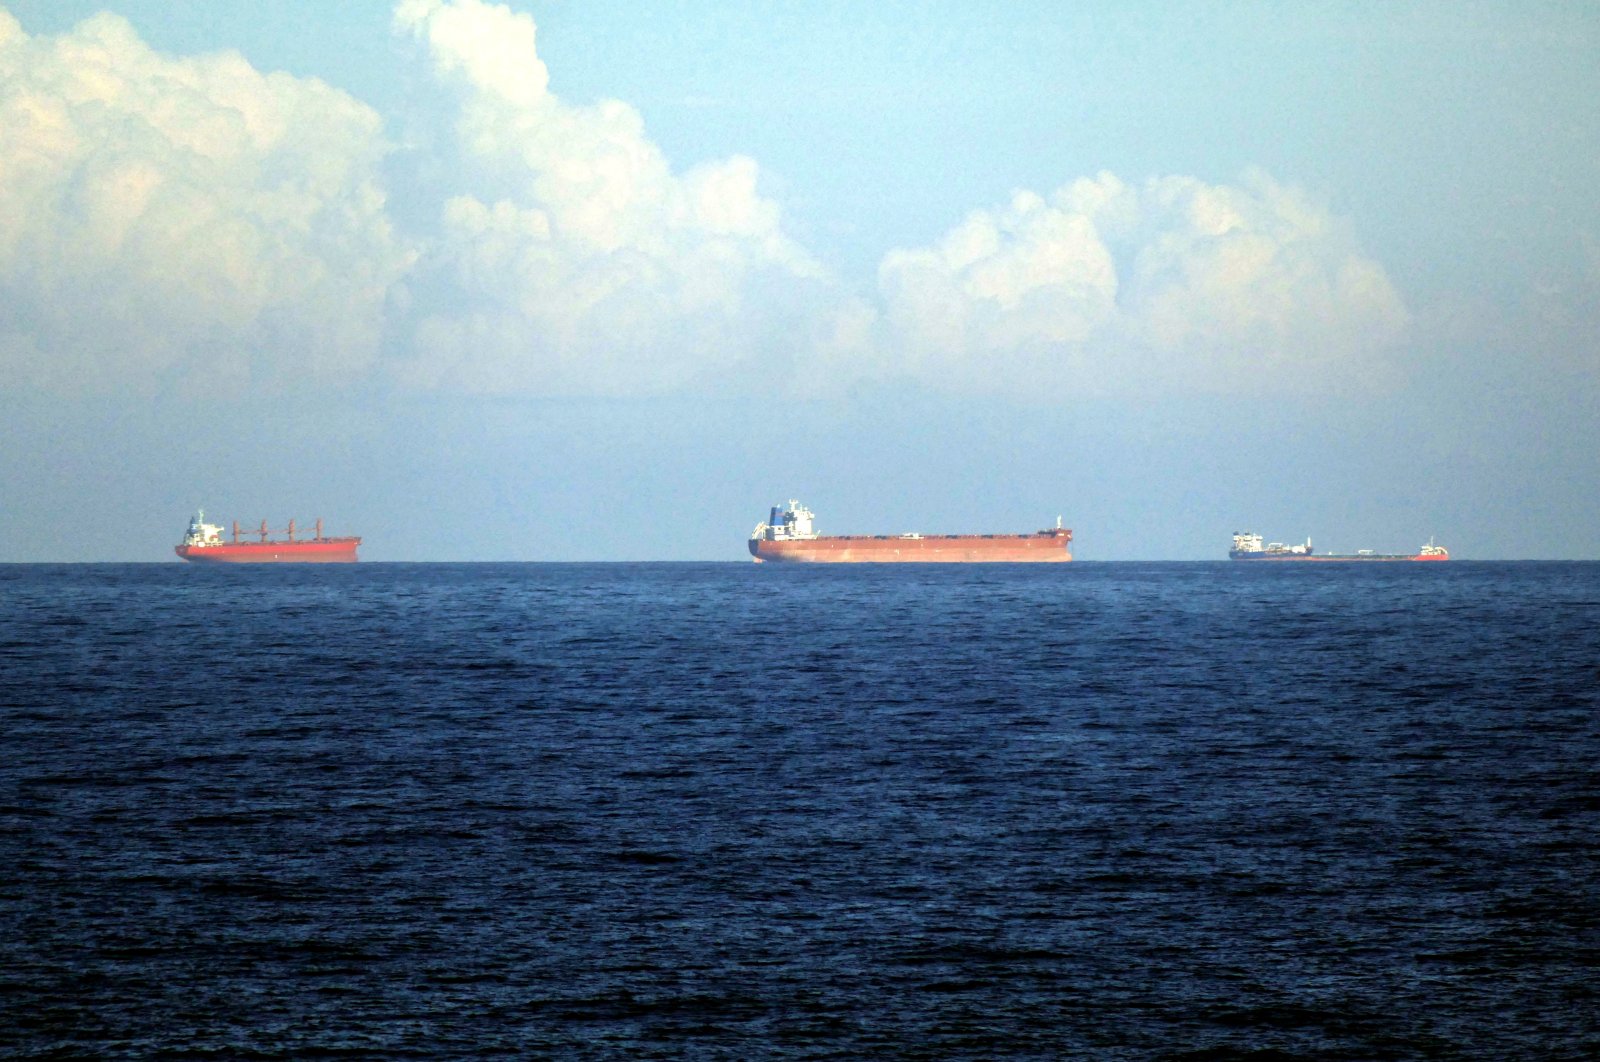 Bulk carriers that will be loaded with Ukrainian grain crops as part of the grain initiative are seen off the shore in the Black Sea, Odessa, southern Ukraine, Sept. 13, 2022. (Reuters Photo)